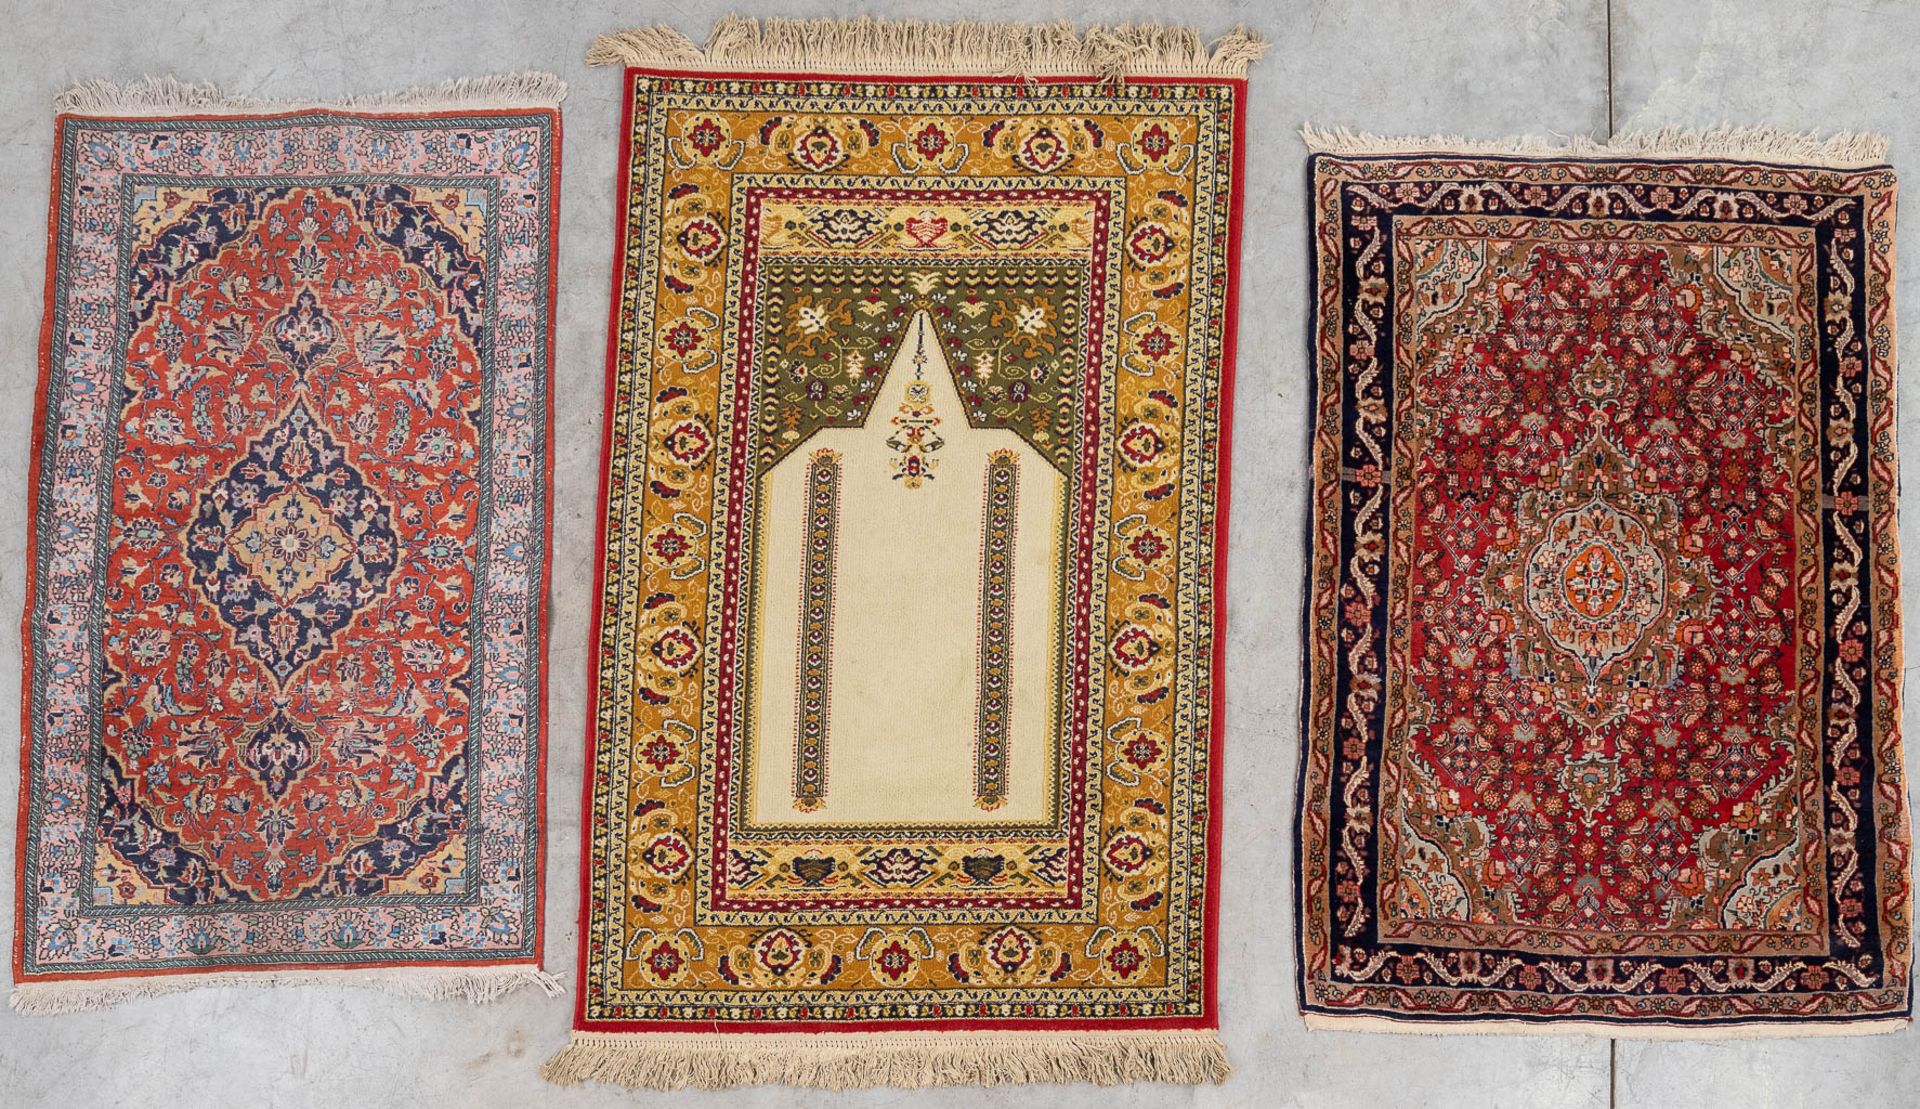 A collection of 3 Oriental hand-made carpets. Kashan and a prayer rug. (L: 180 x W: 119 cm)